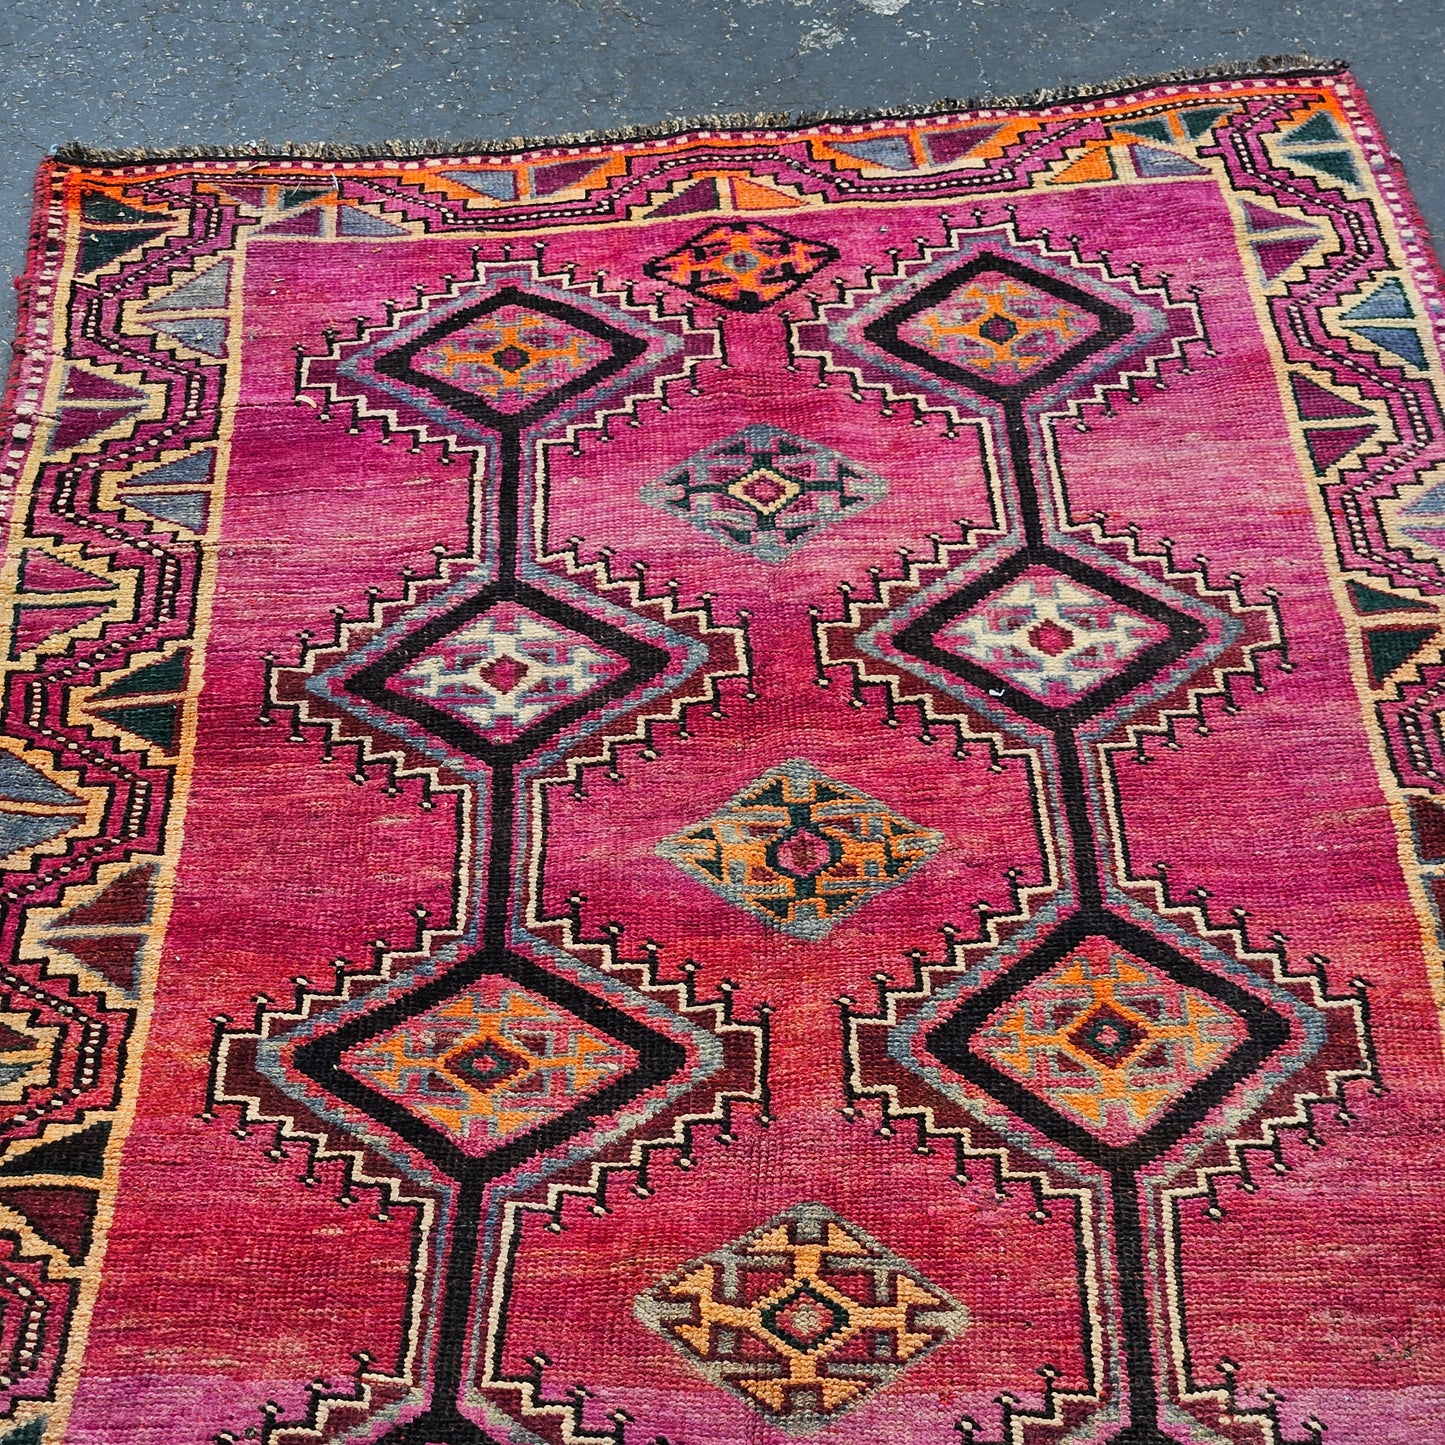 Vintage Hand Knotted Rug / Runner - 4' 4" x 10' 10"